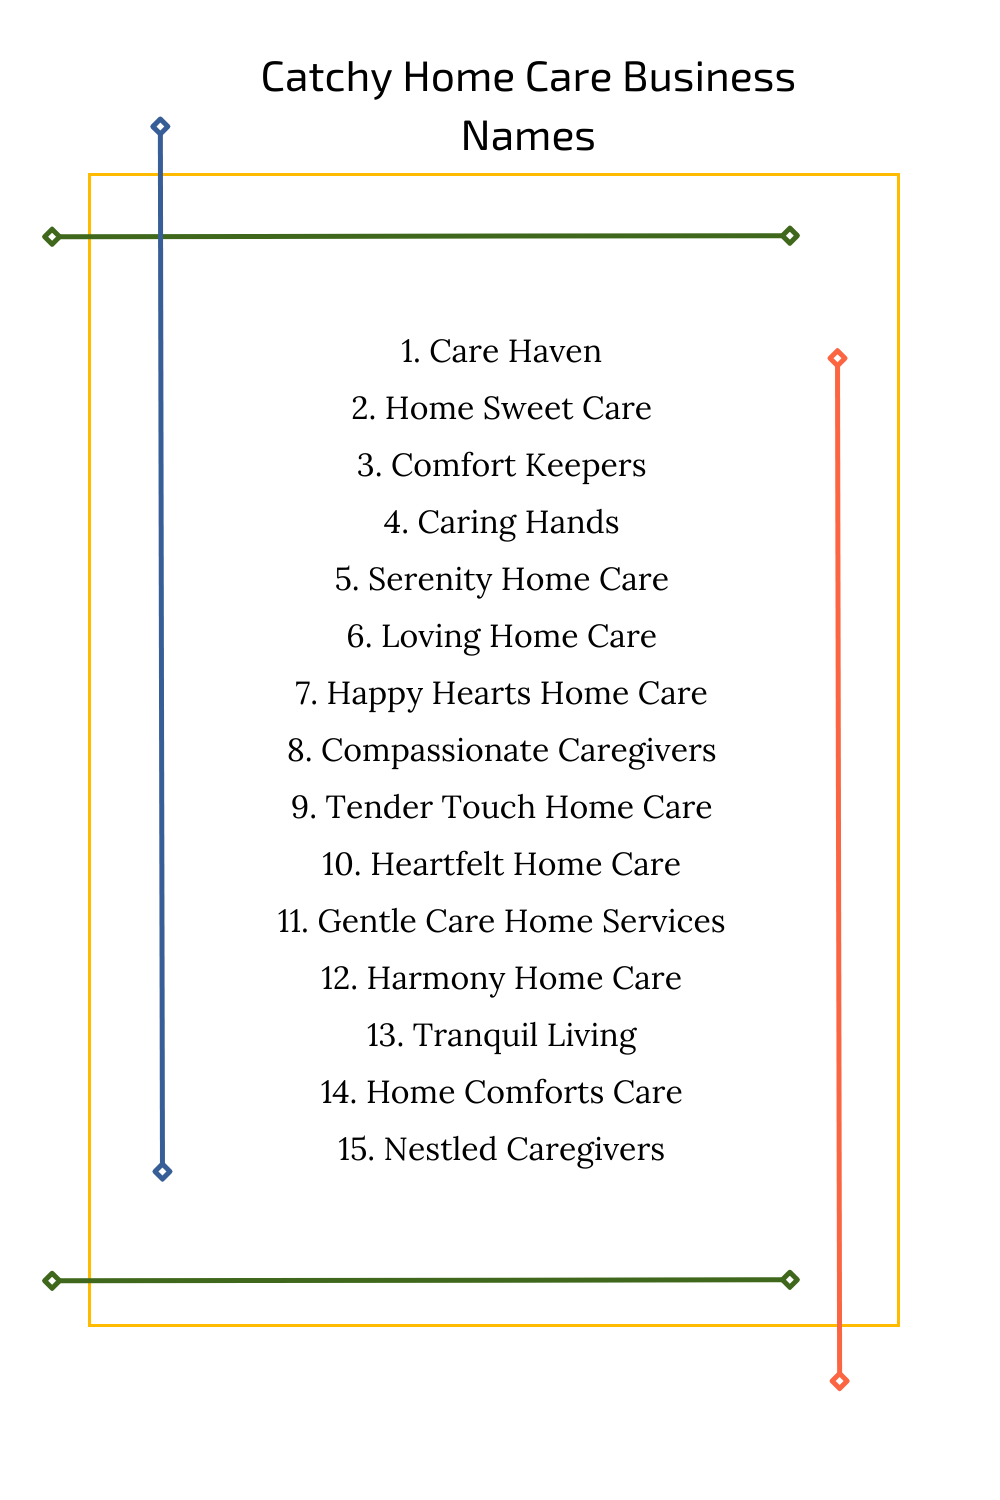 Catchy Home Care Business Names